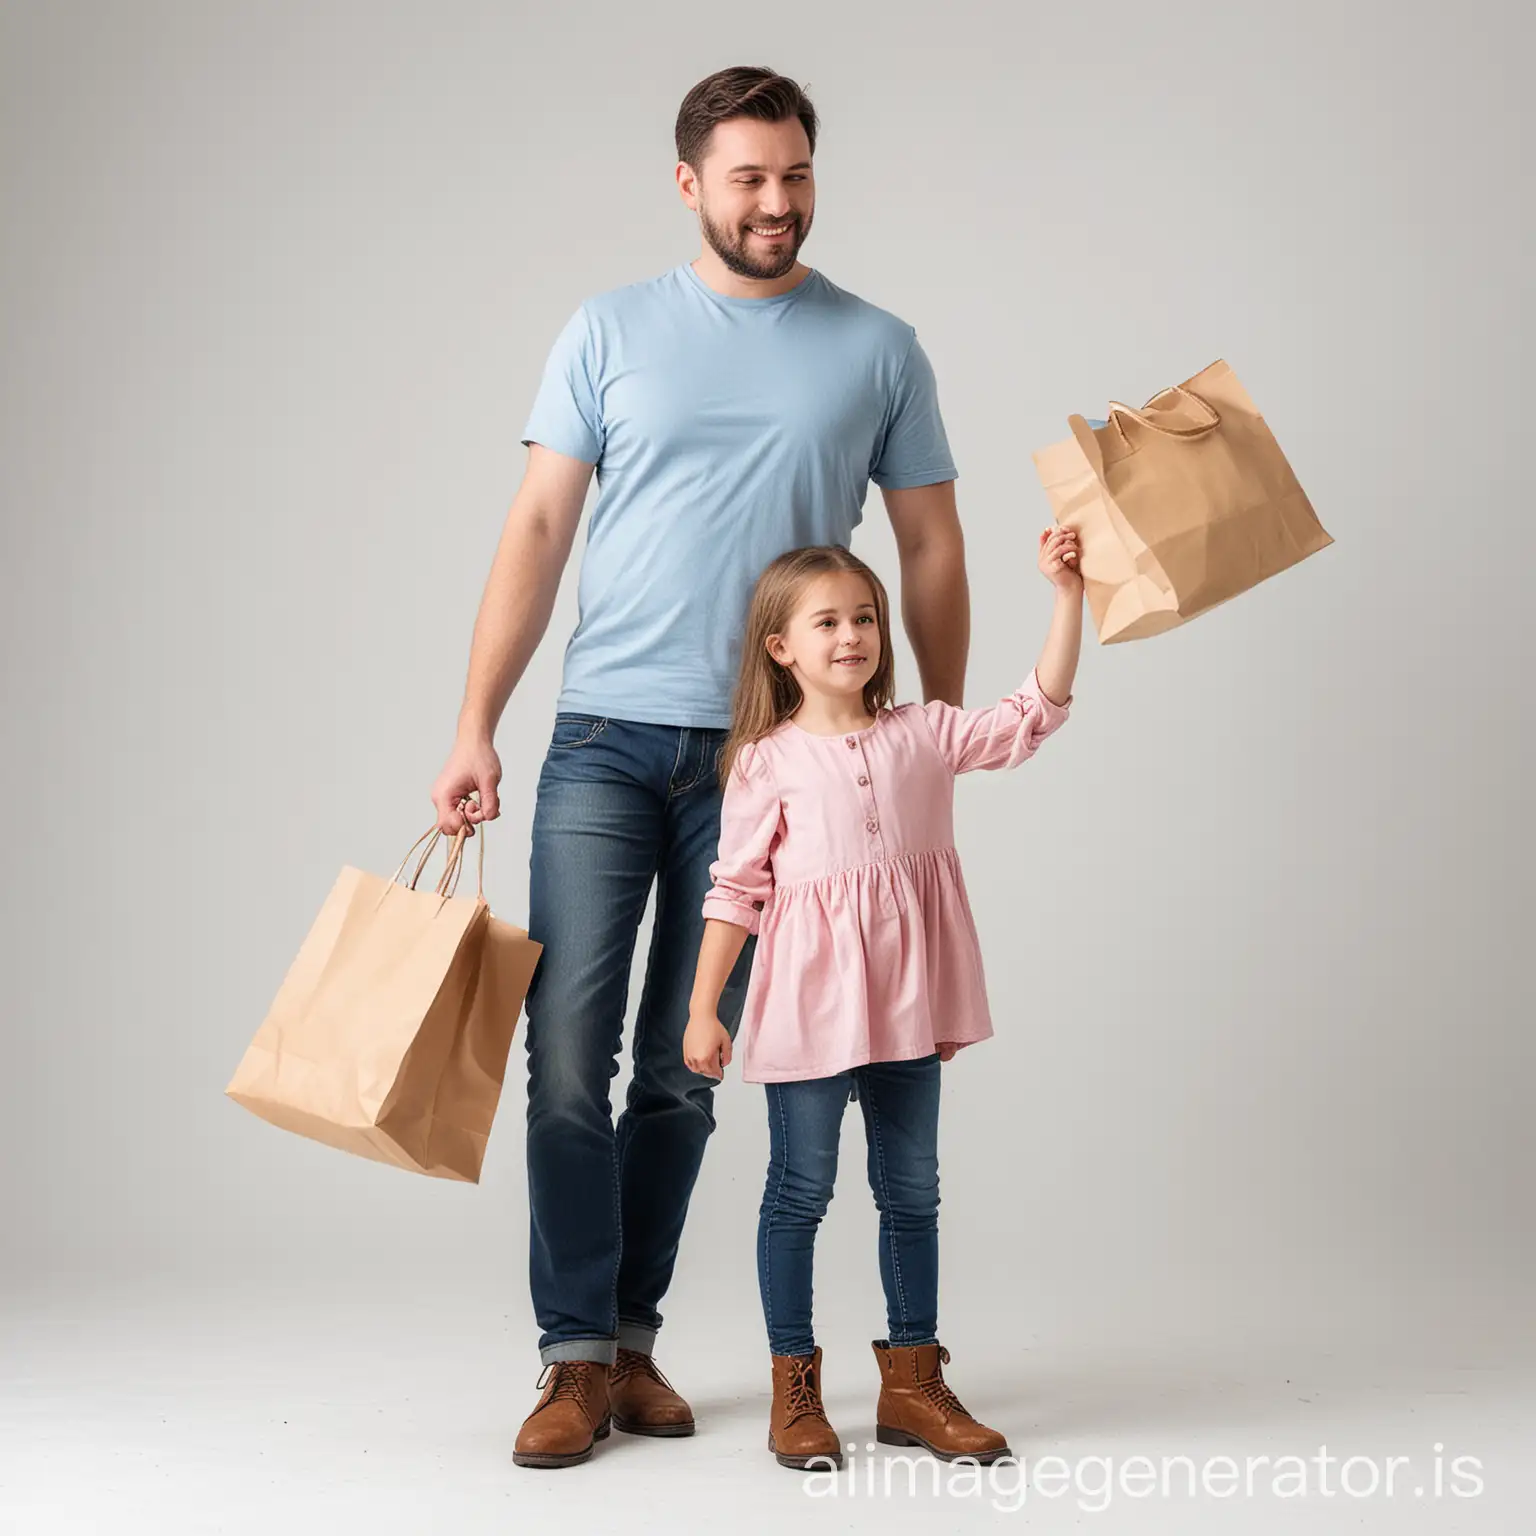 Father-and-Daughter-Shopping-Together-with-Shopping-Bag-on-White-Background